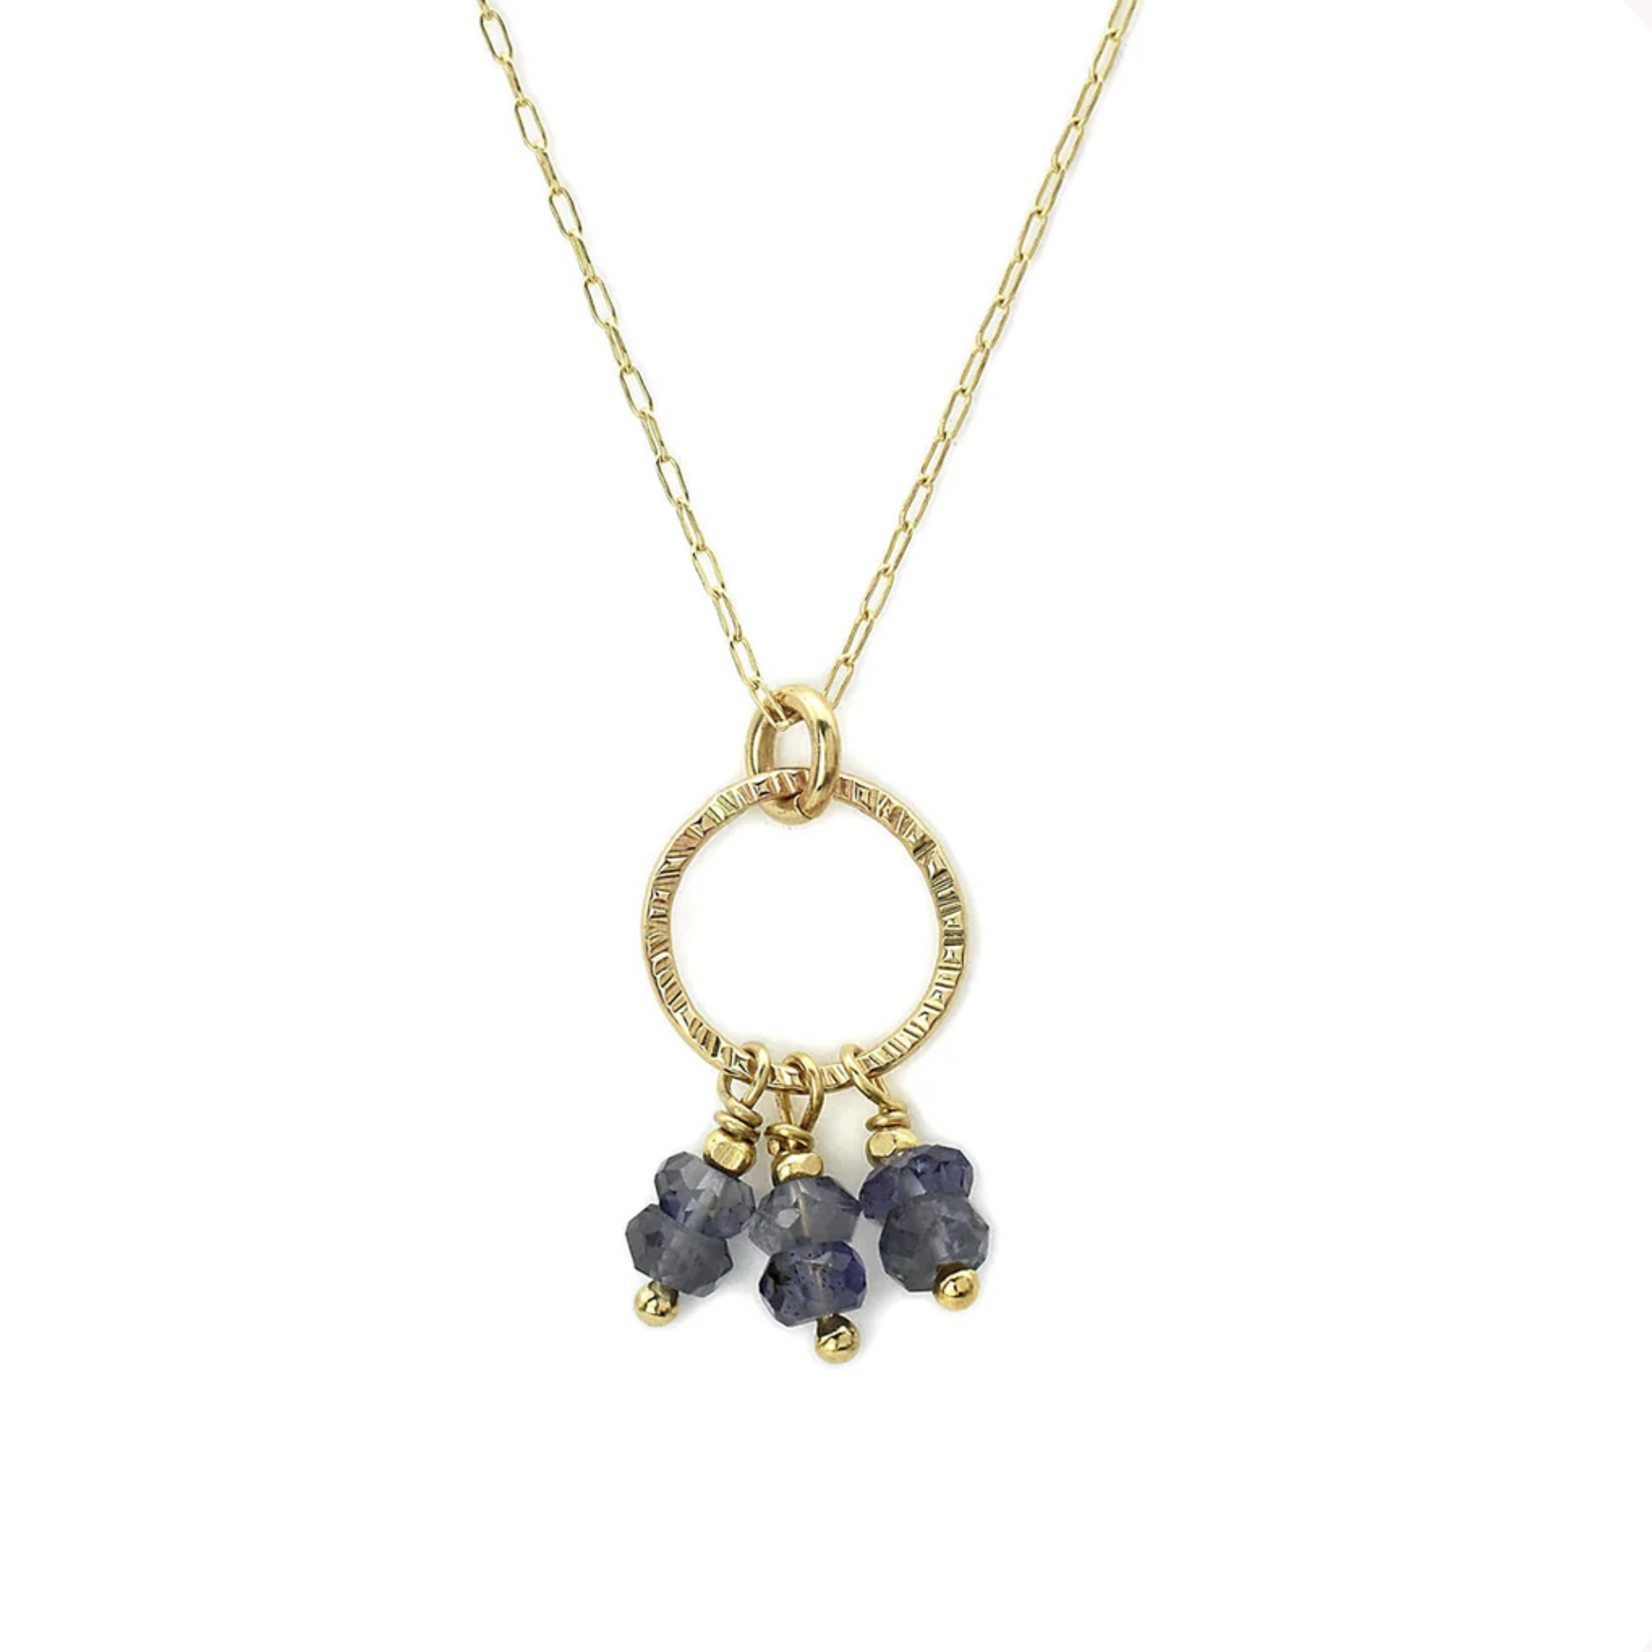 J&I Handmade Necklace with faceted 4mm Iolite dangles  on 14k Gold filled Circle Pendant